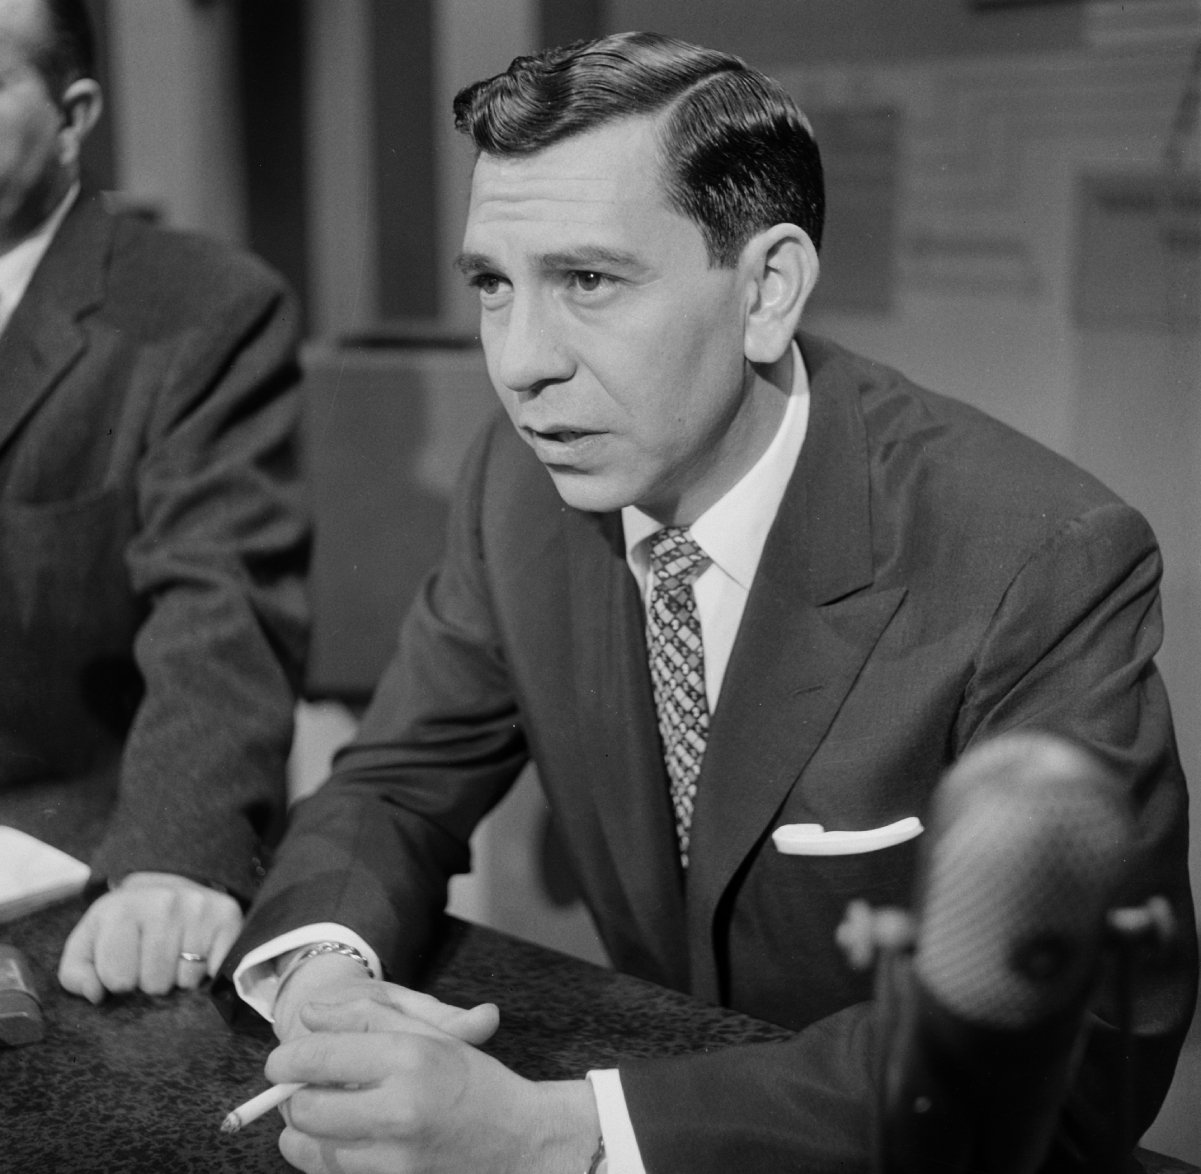 'Dragnet' star Jack Webb dressed in a suit and tie in 1955